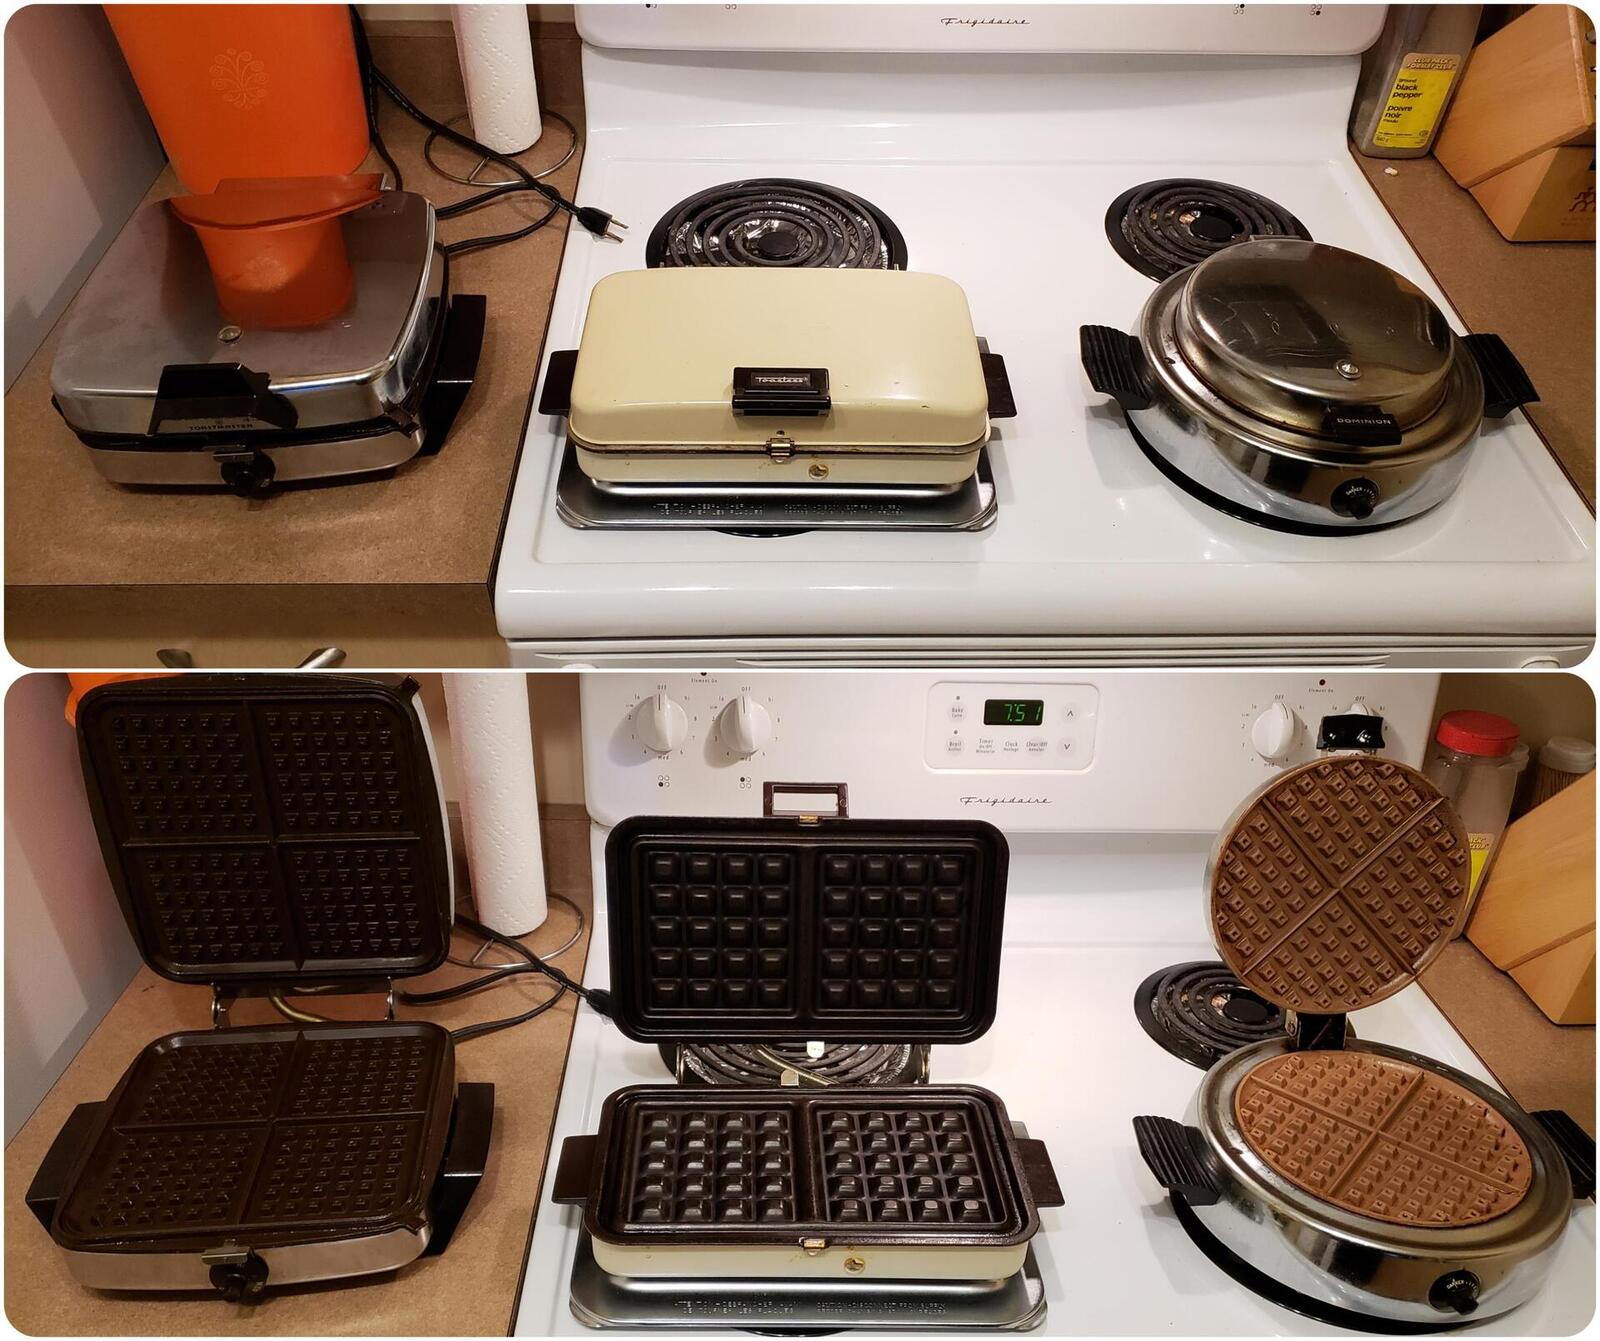 Who Invented The Waffle Iron?